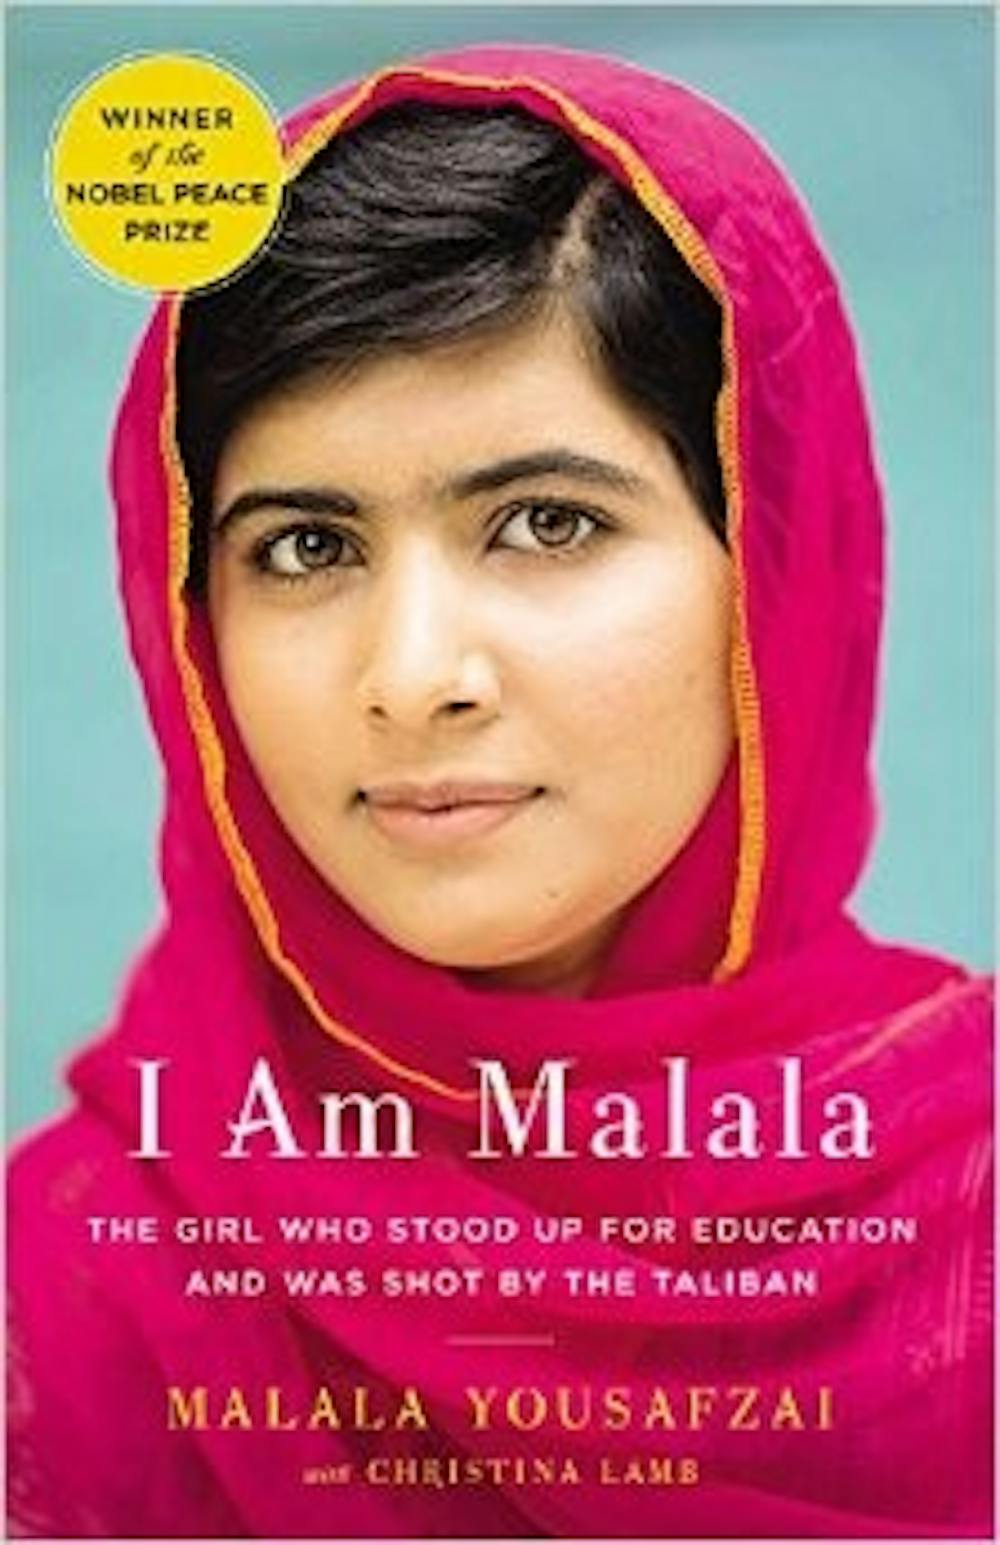 <p>"I Am Malala: The Girl Who Stood Up for Education and was Shot by the Taliban" details Malala Yousafzai's inspiring and tireless efforts fighting for education for girls around the world.</p>